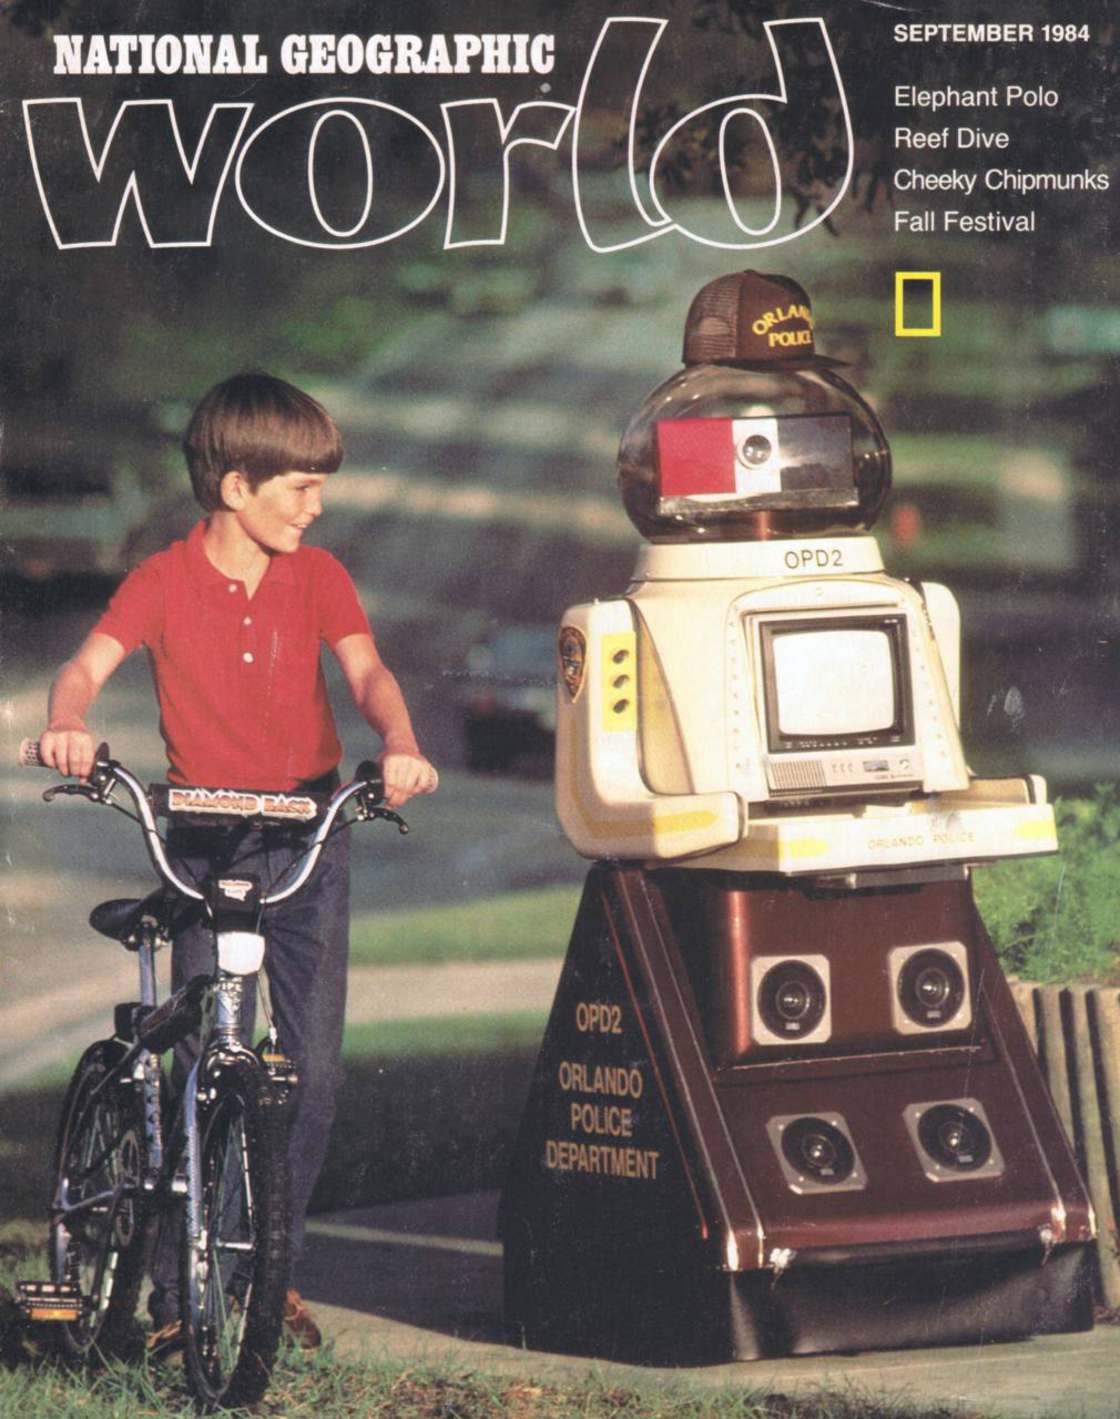 cassette futurism robot - National Geographic word Elephant Polo Reef Dive Cheeky Chipmunks Fall Festival OPD2 OPD2 Orlando Police Department